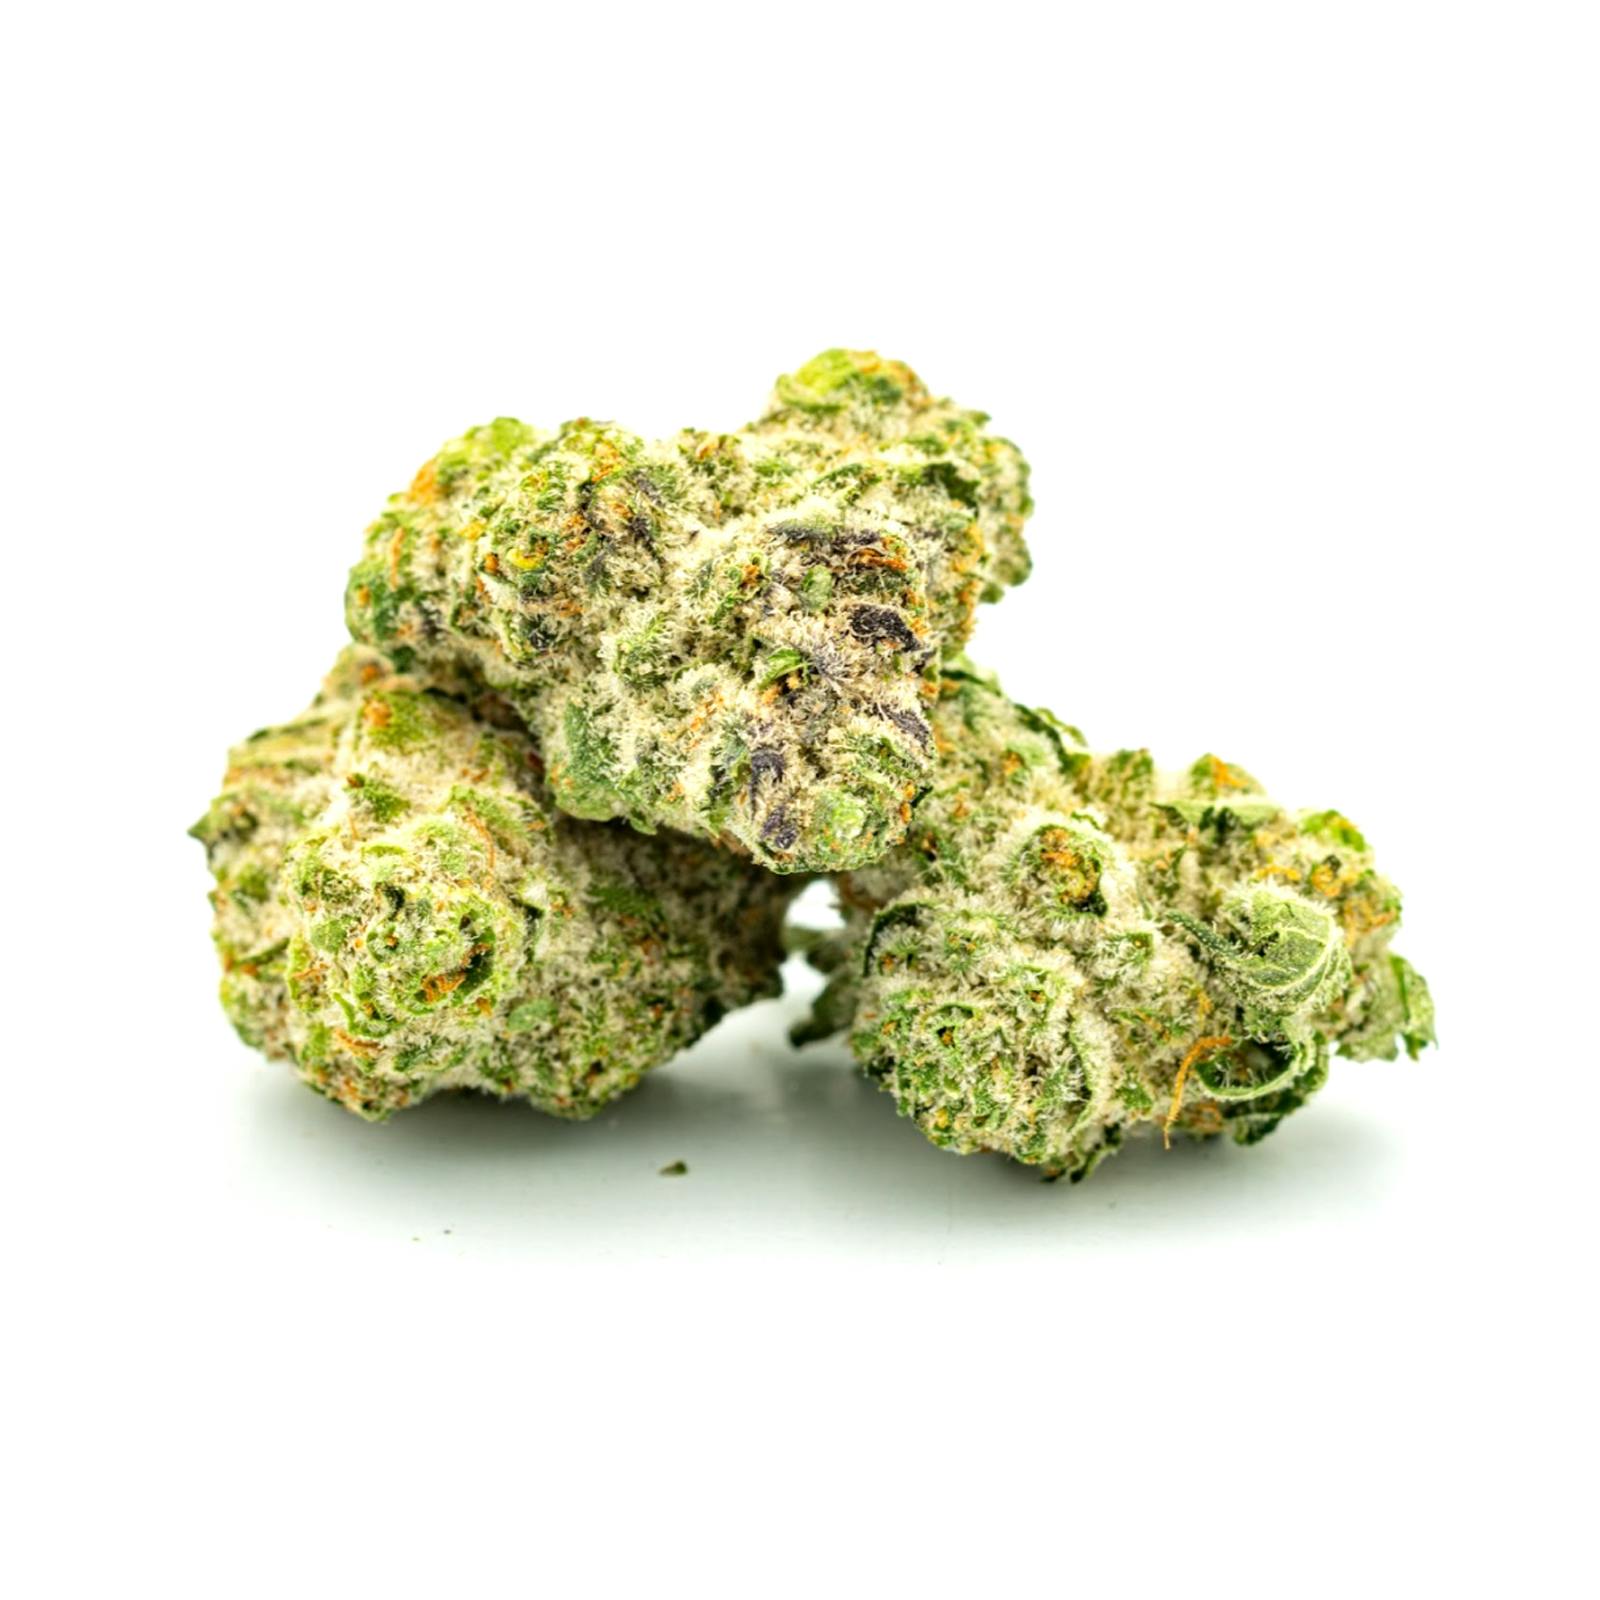 Named for its iconic aroma of garlic and skunk, Garlic Mints is a cross of the iconic GMO with Animal Mints Bx1. Reported to offer strong indica effects for relieving pain, inflammation, stress and anxiety, this strain is perfect for a night of relaxation. Brought to us by Cabin Fever Seed Breeders.
